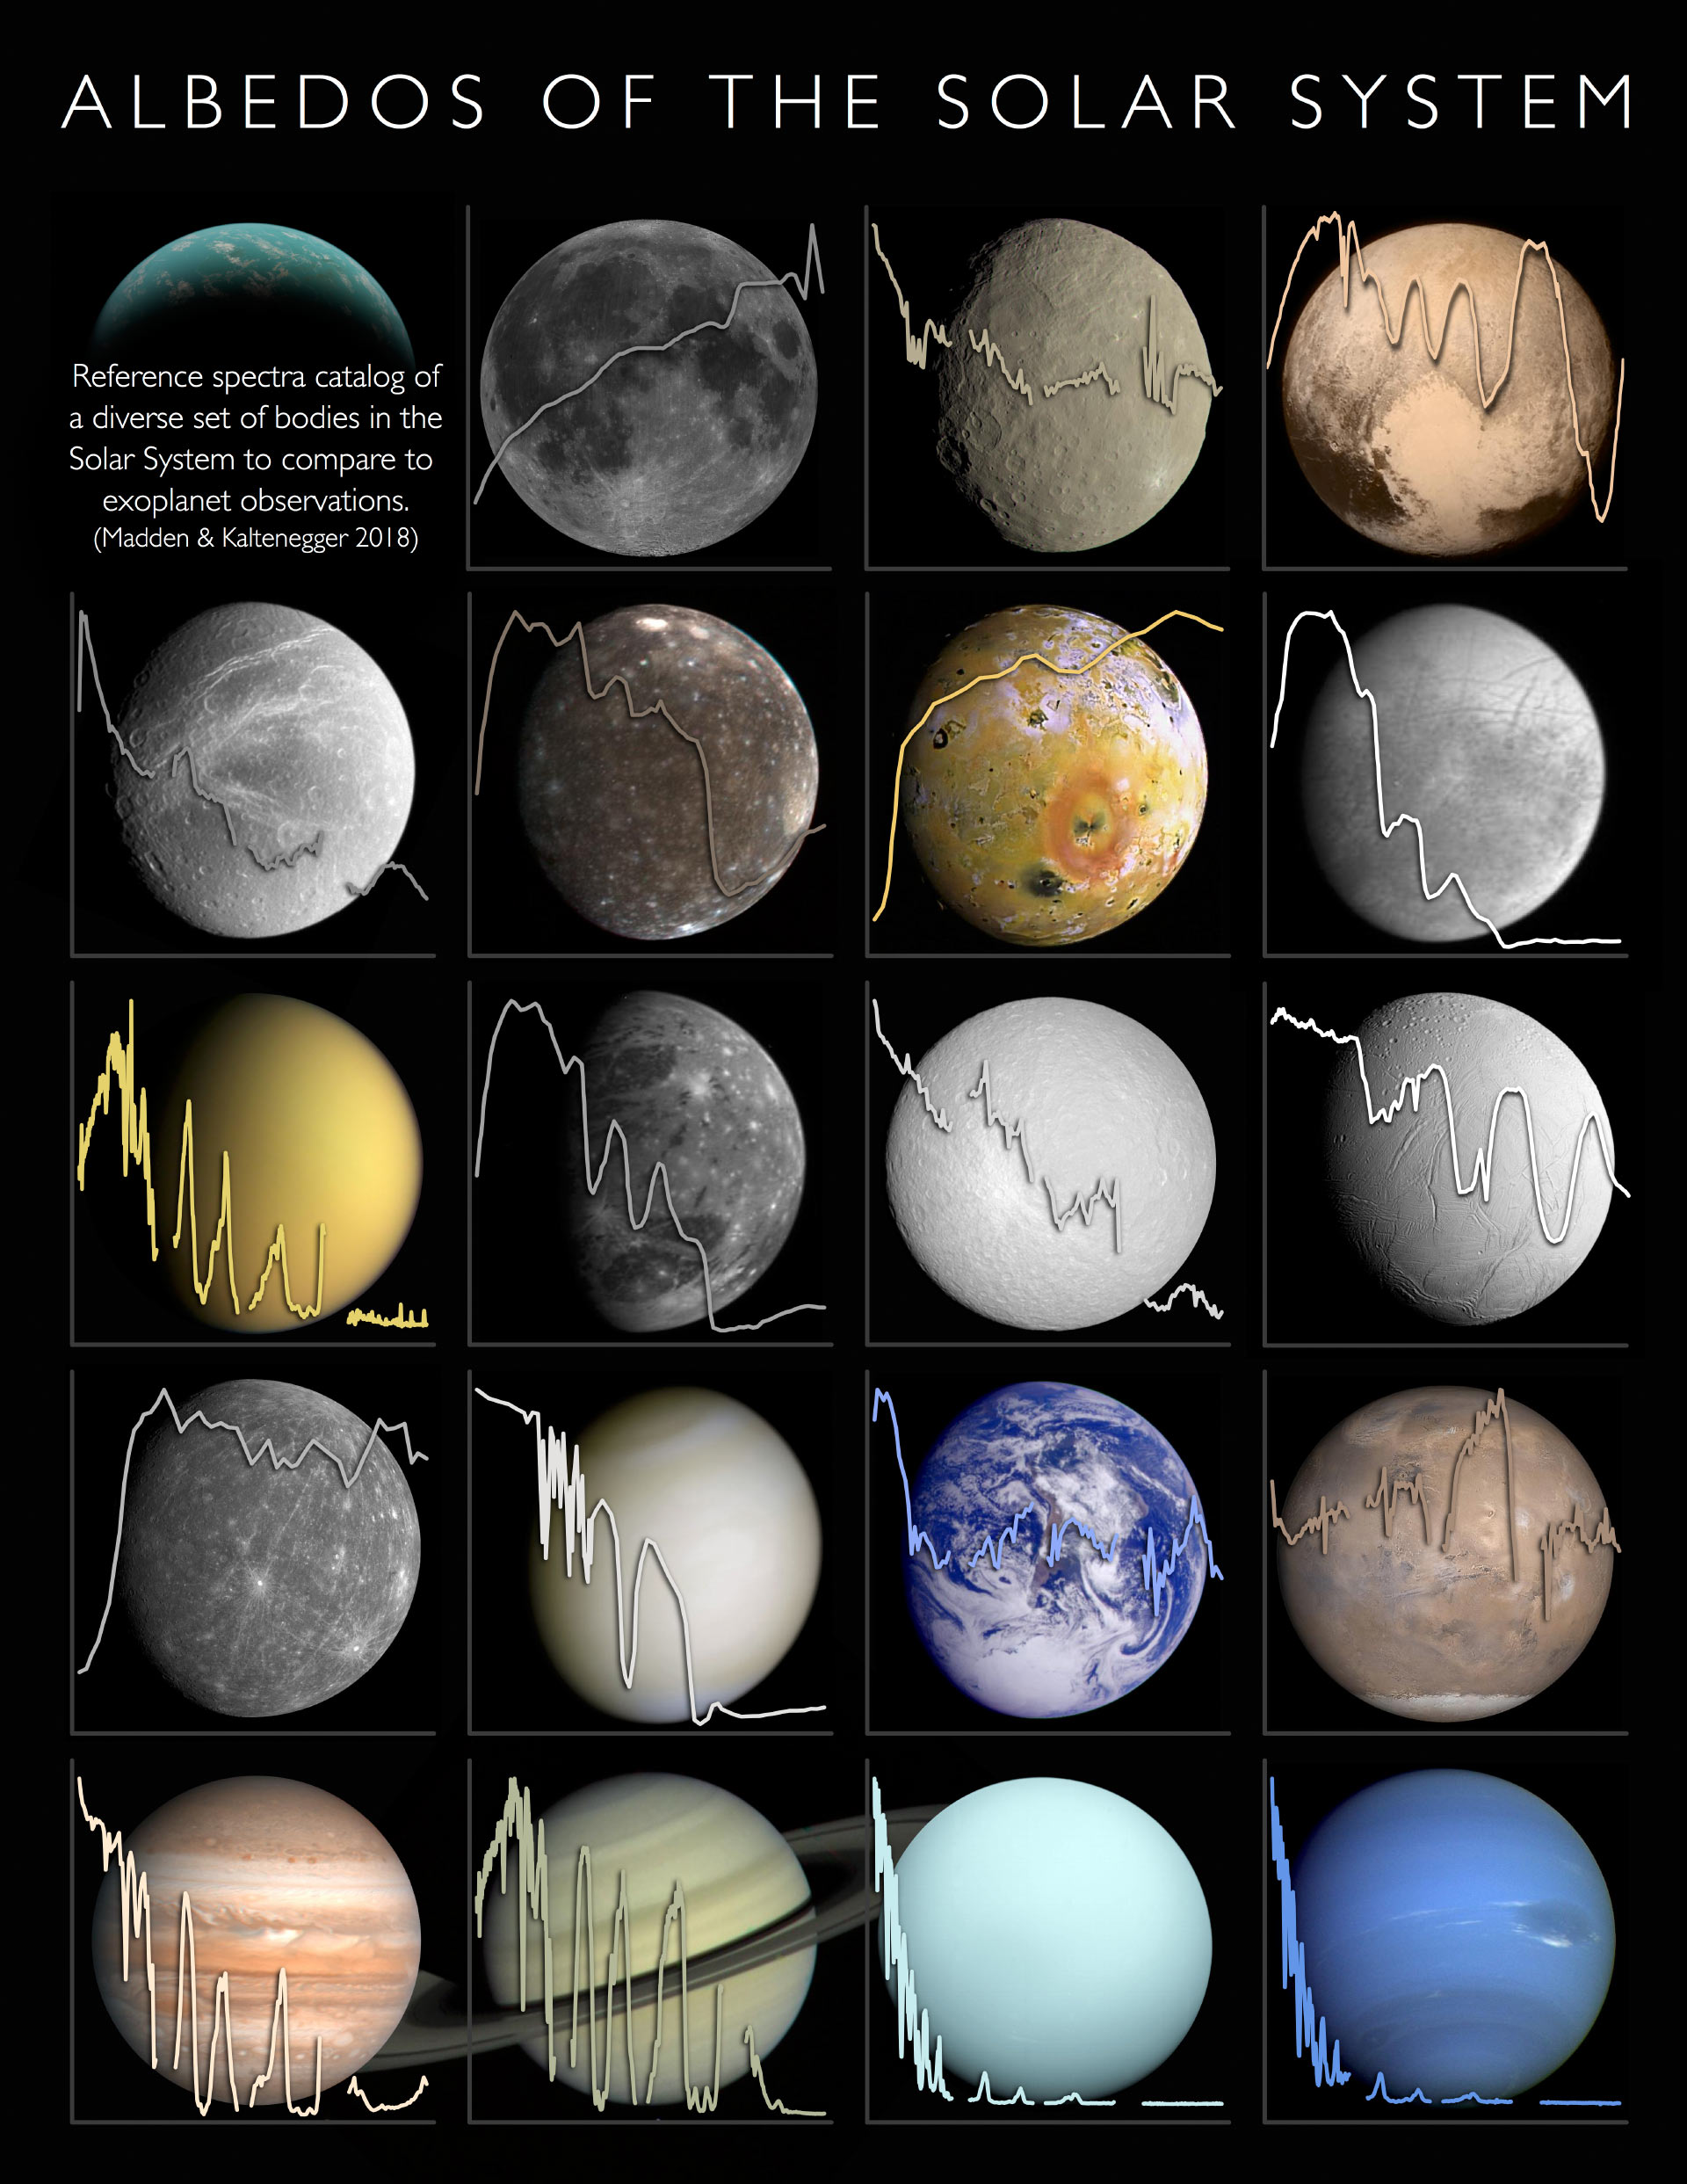 <span style='font-size:16px;position:relative;top:-60px'>[Albedos of solar system bodies. Image credit: Jack Madden & Lisa Kaltenegger / Carl Sagan Institute, Cornell University.](http://www.sci-news.com/astronomy/reference-catalog-solar-system-bodies-spectra-albedos-06262.html)</span>